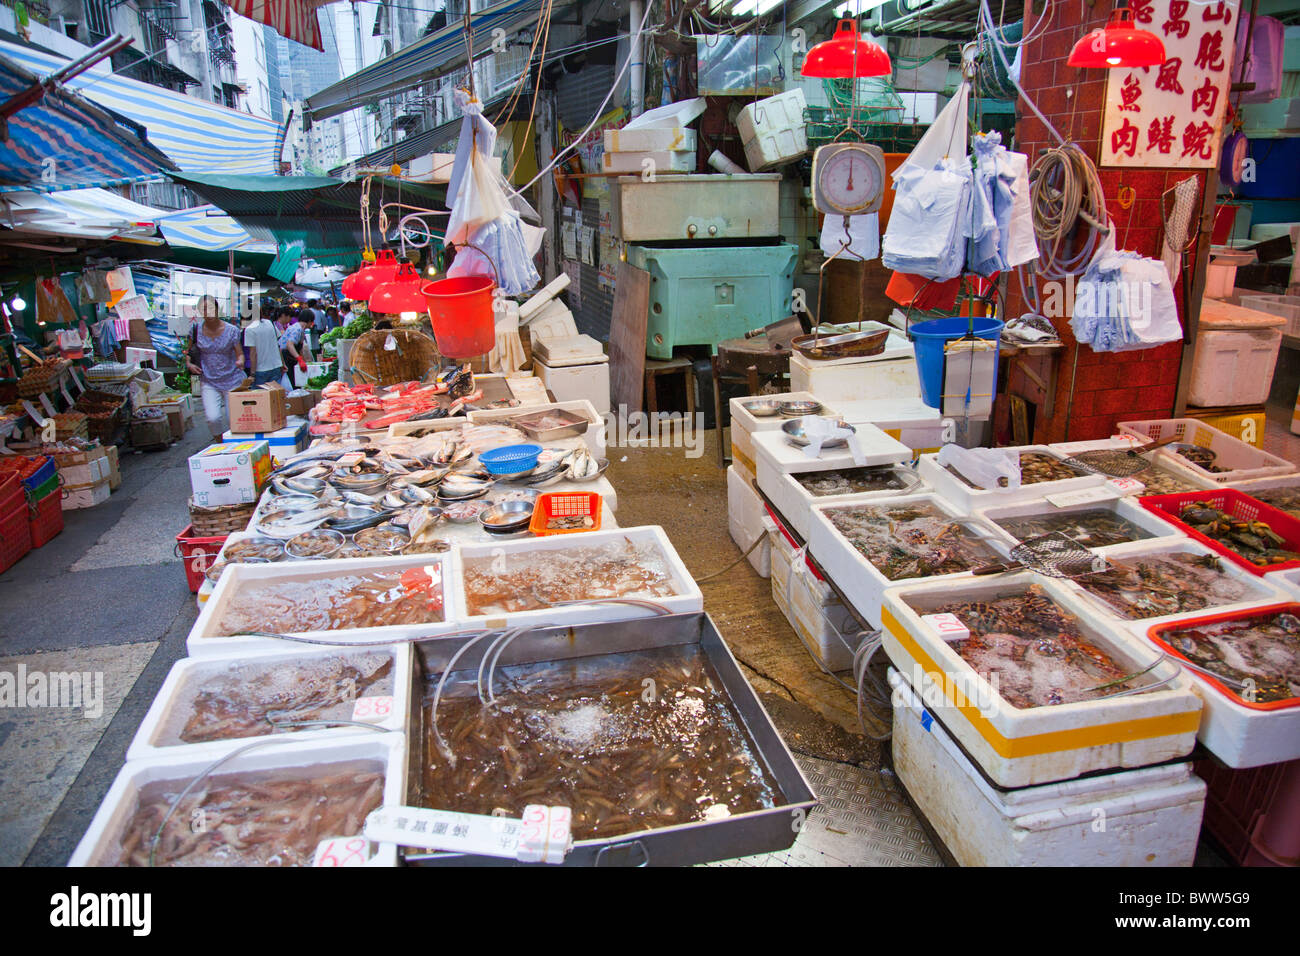 Gage Street Market in Hong Kong city, fresh produce include meat, fish, poultry. smelly and scary all in one go Stock Photo